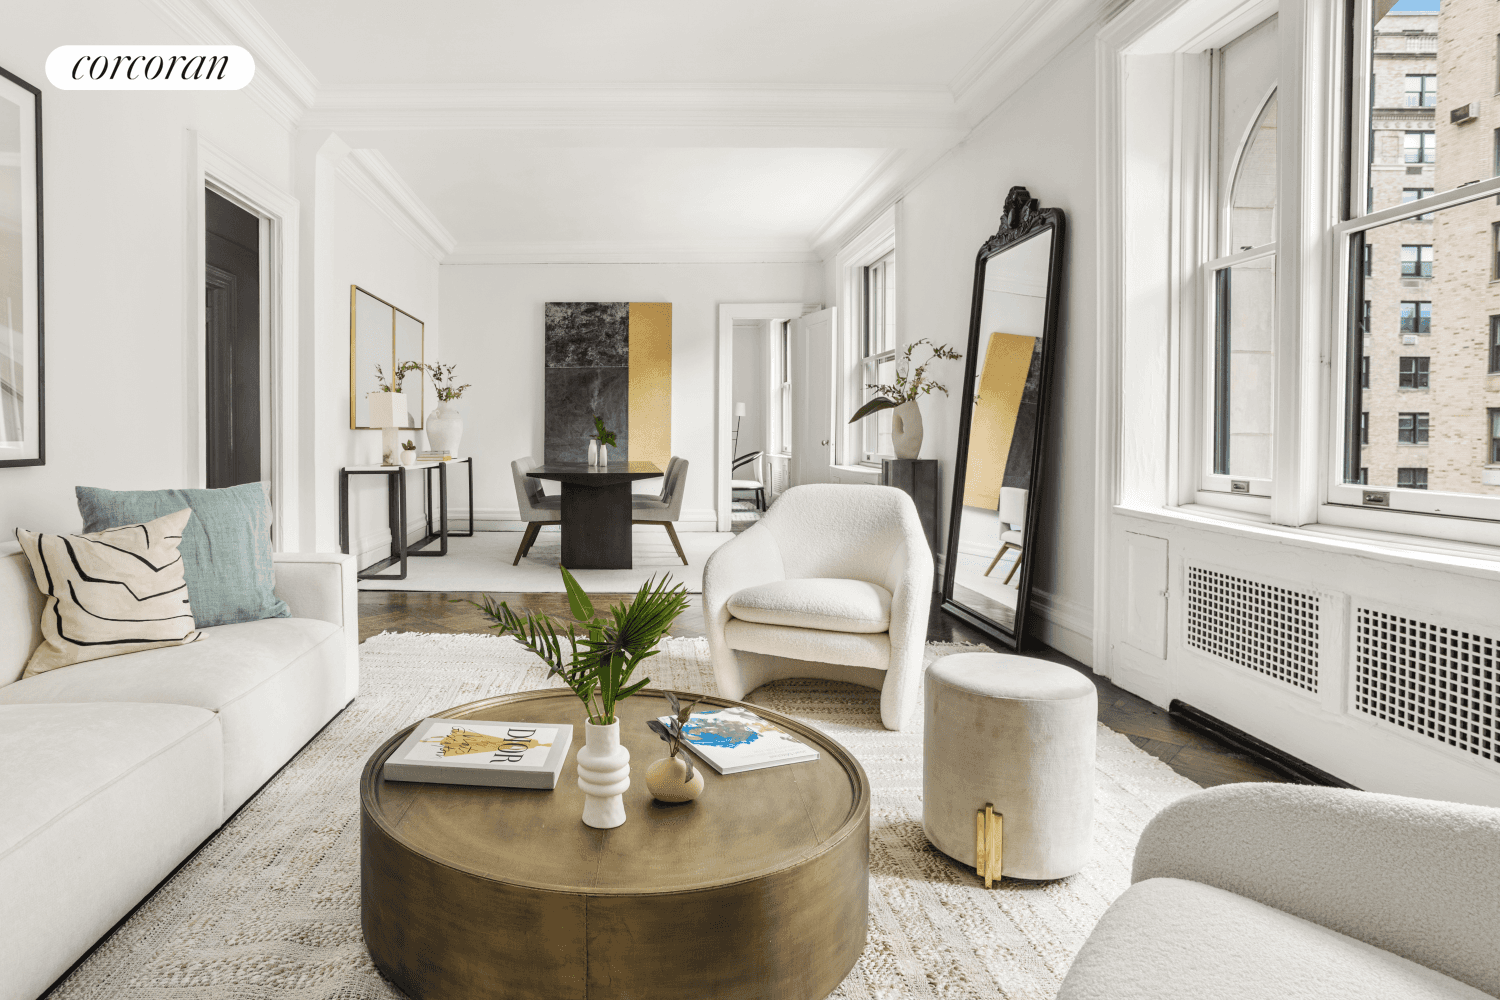 Offered for the first time in 50 years, 1261 Madison, Apartment 5N, is a grand, half floor 8 into 7 room property located in a Landmarked Beaux Arts boutique cooperative ...